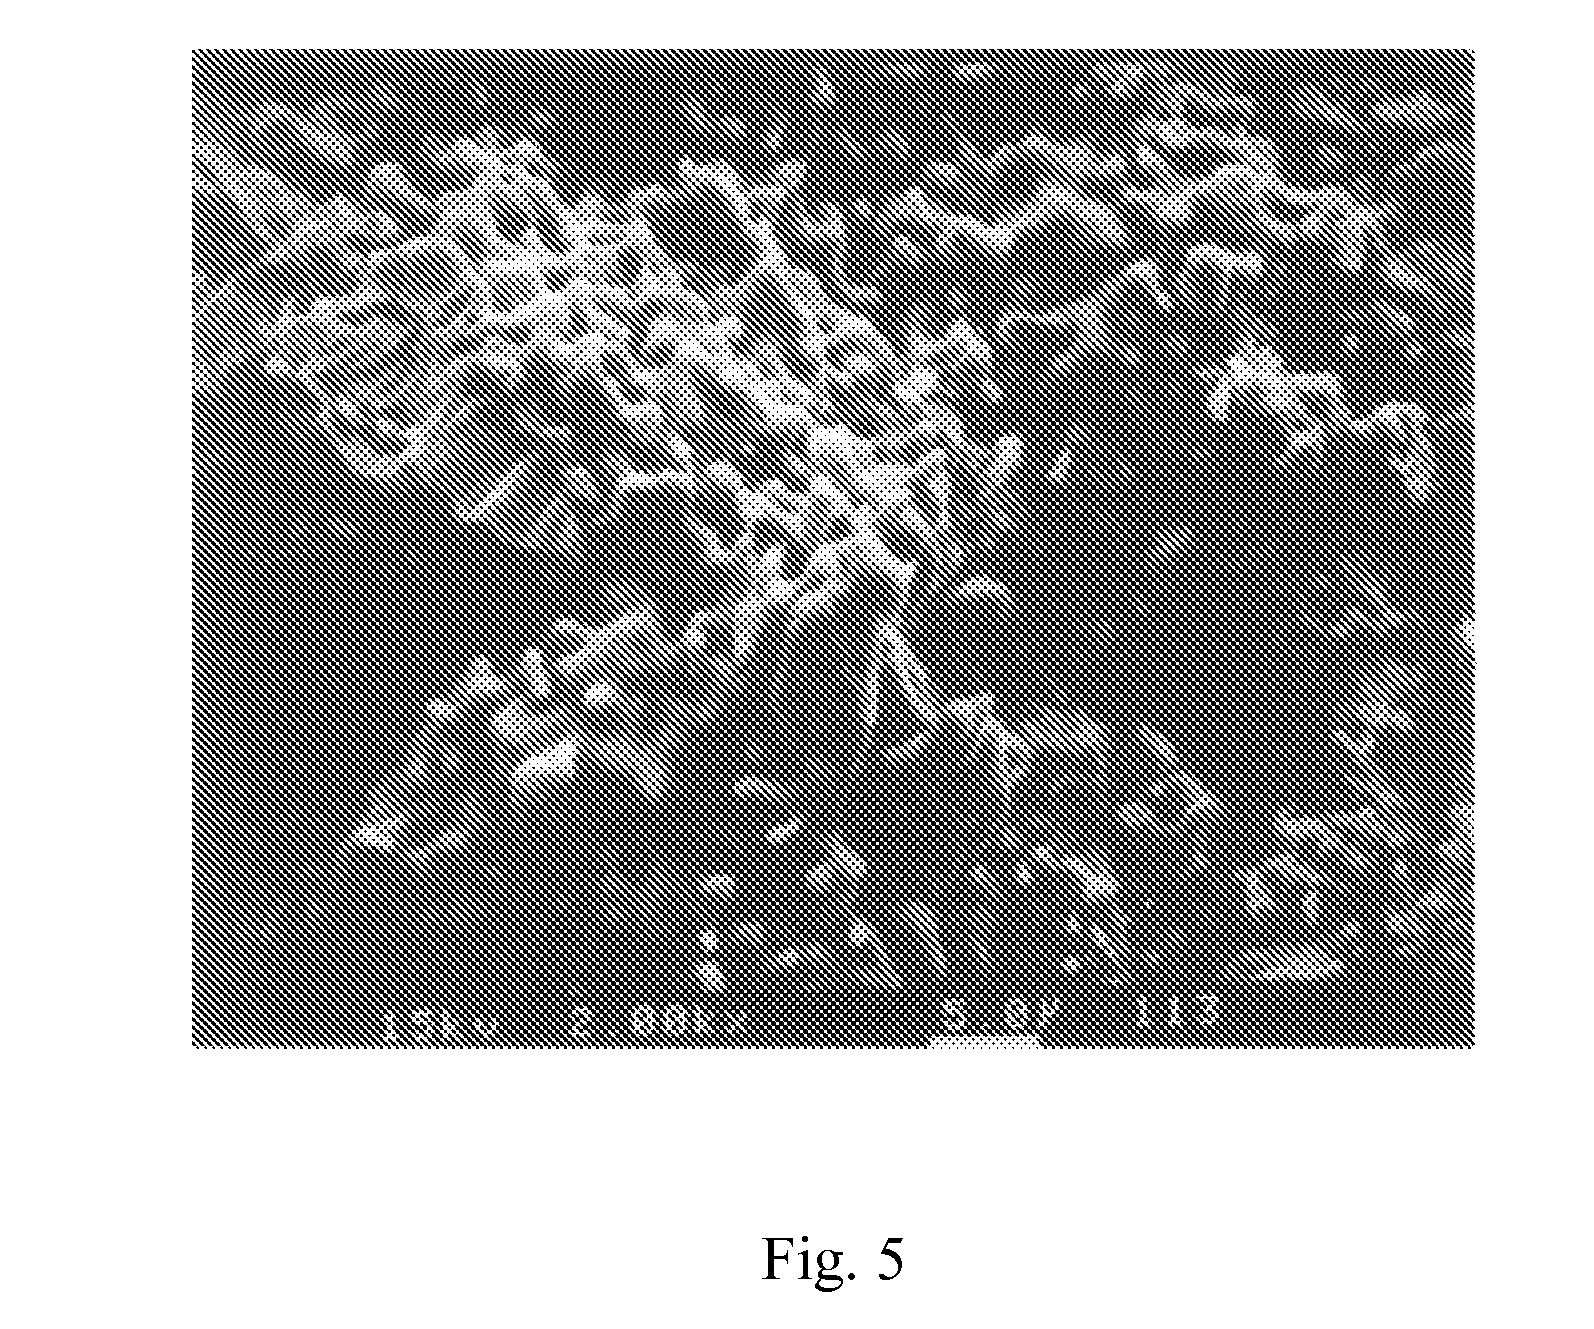 Production of high-purity titanium monoxide and capacitor production therefrom